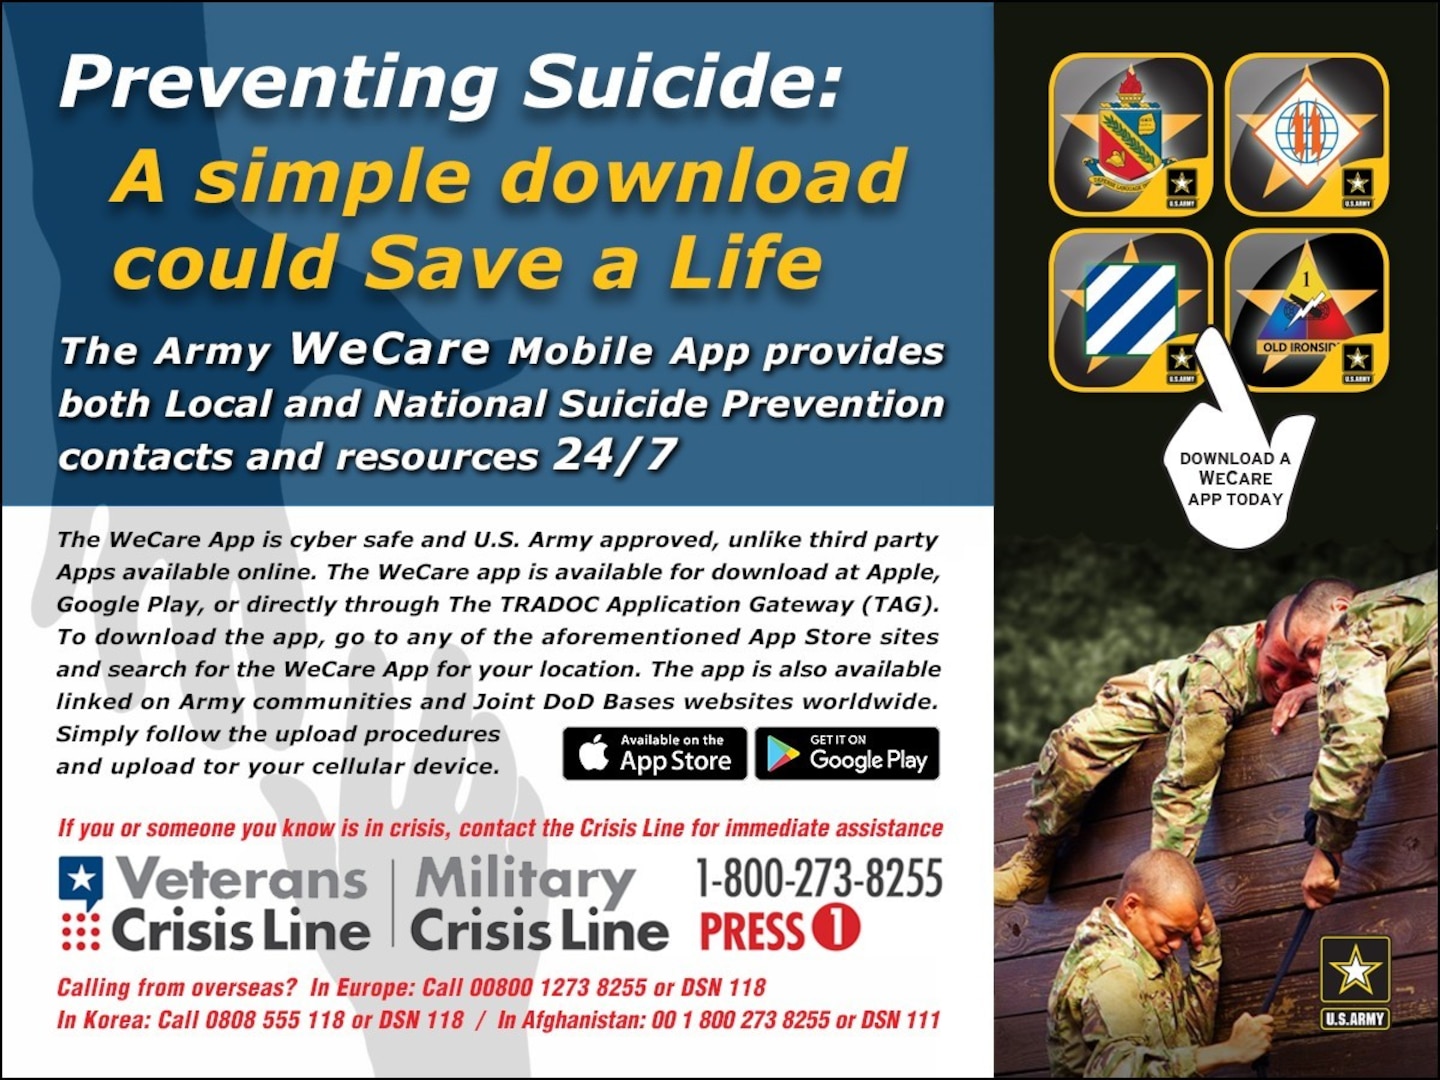 TRADOC’s “WeCare” app is location/post specific, and it supports the Army’s Suicide Prevention Campaign. It serves as a 24/7 ready resource for those feeling alone and considering suicide, or for those who are concerned about someone and are trying to intervene. The app also provides instructions for reporting sexual assault, and has other useful embedded tools.